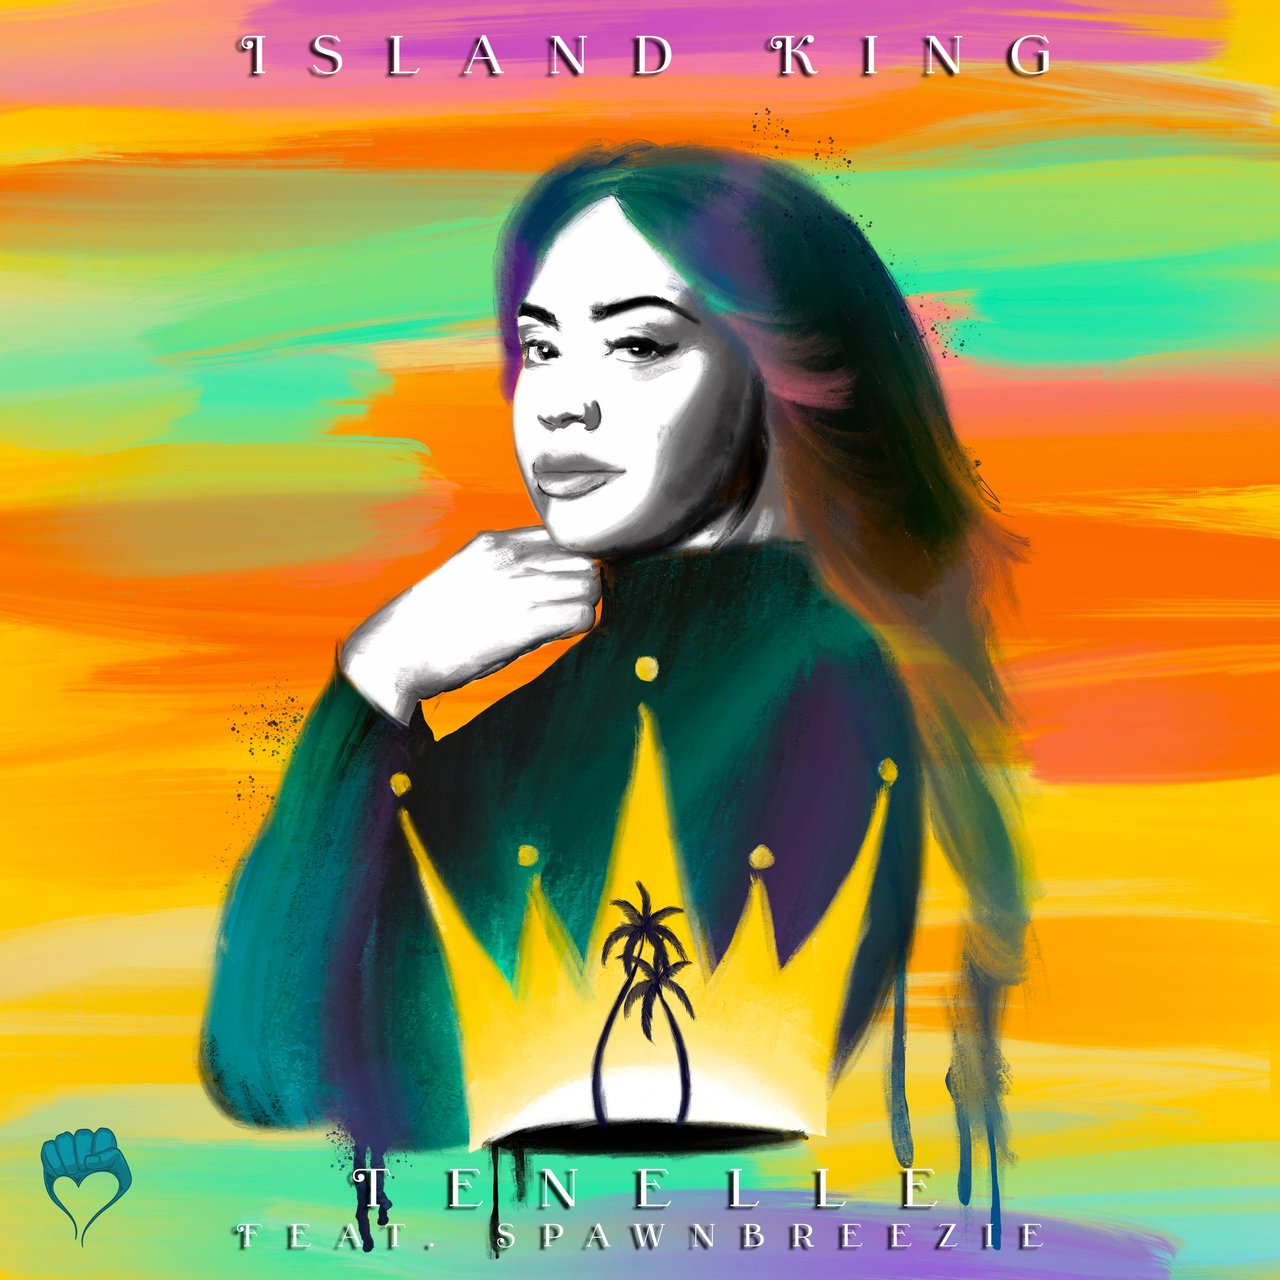 Tenelle - Island King (ft. Spawnbreezie) (Cover)